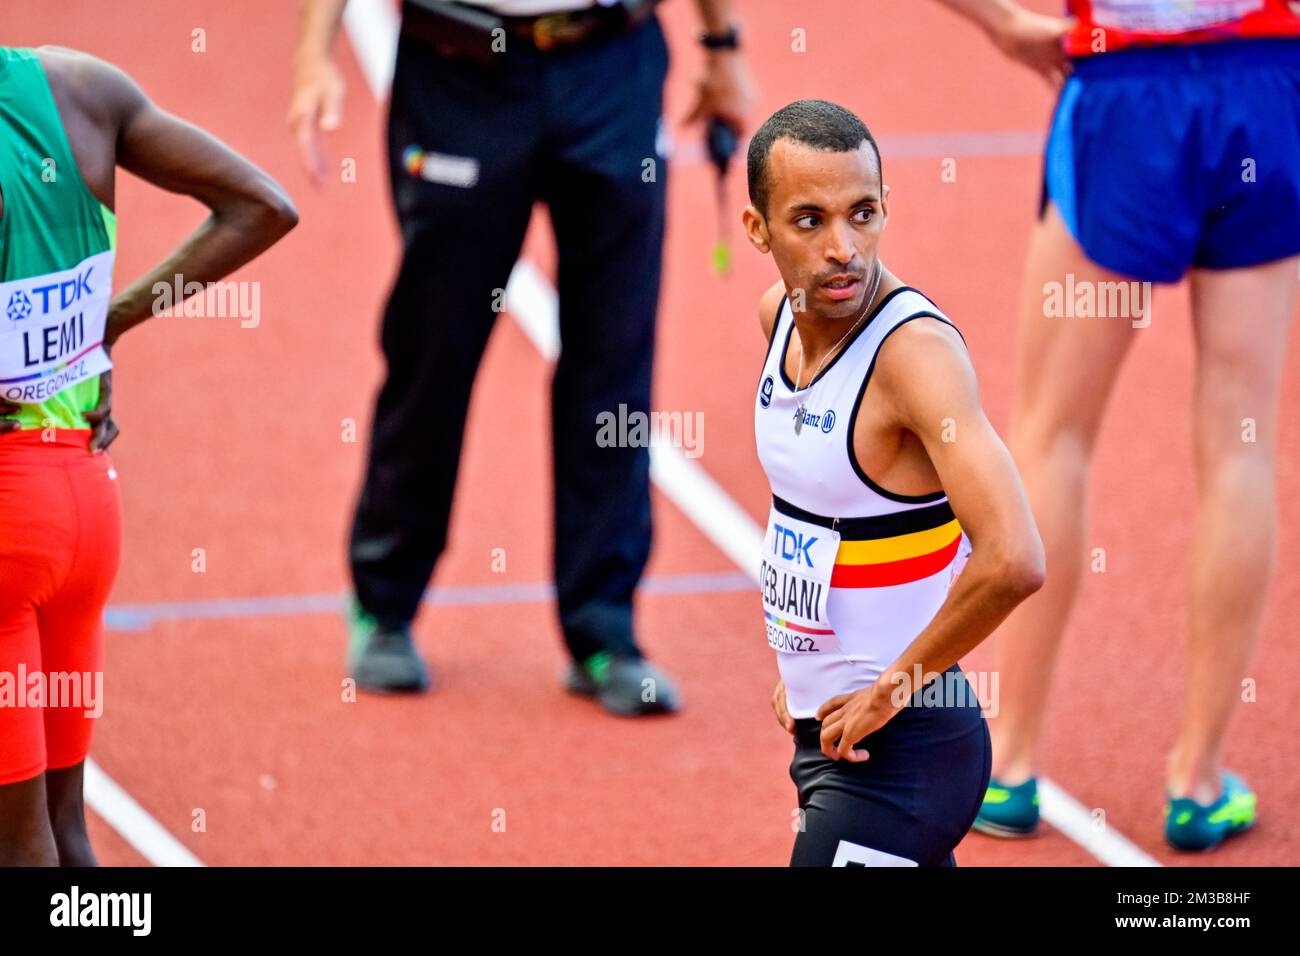 Belgian Ismael Debjani pictured after the heats of the men's 1500m